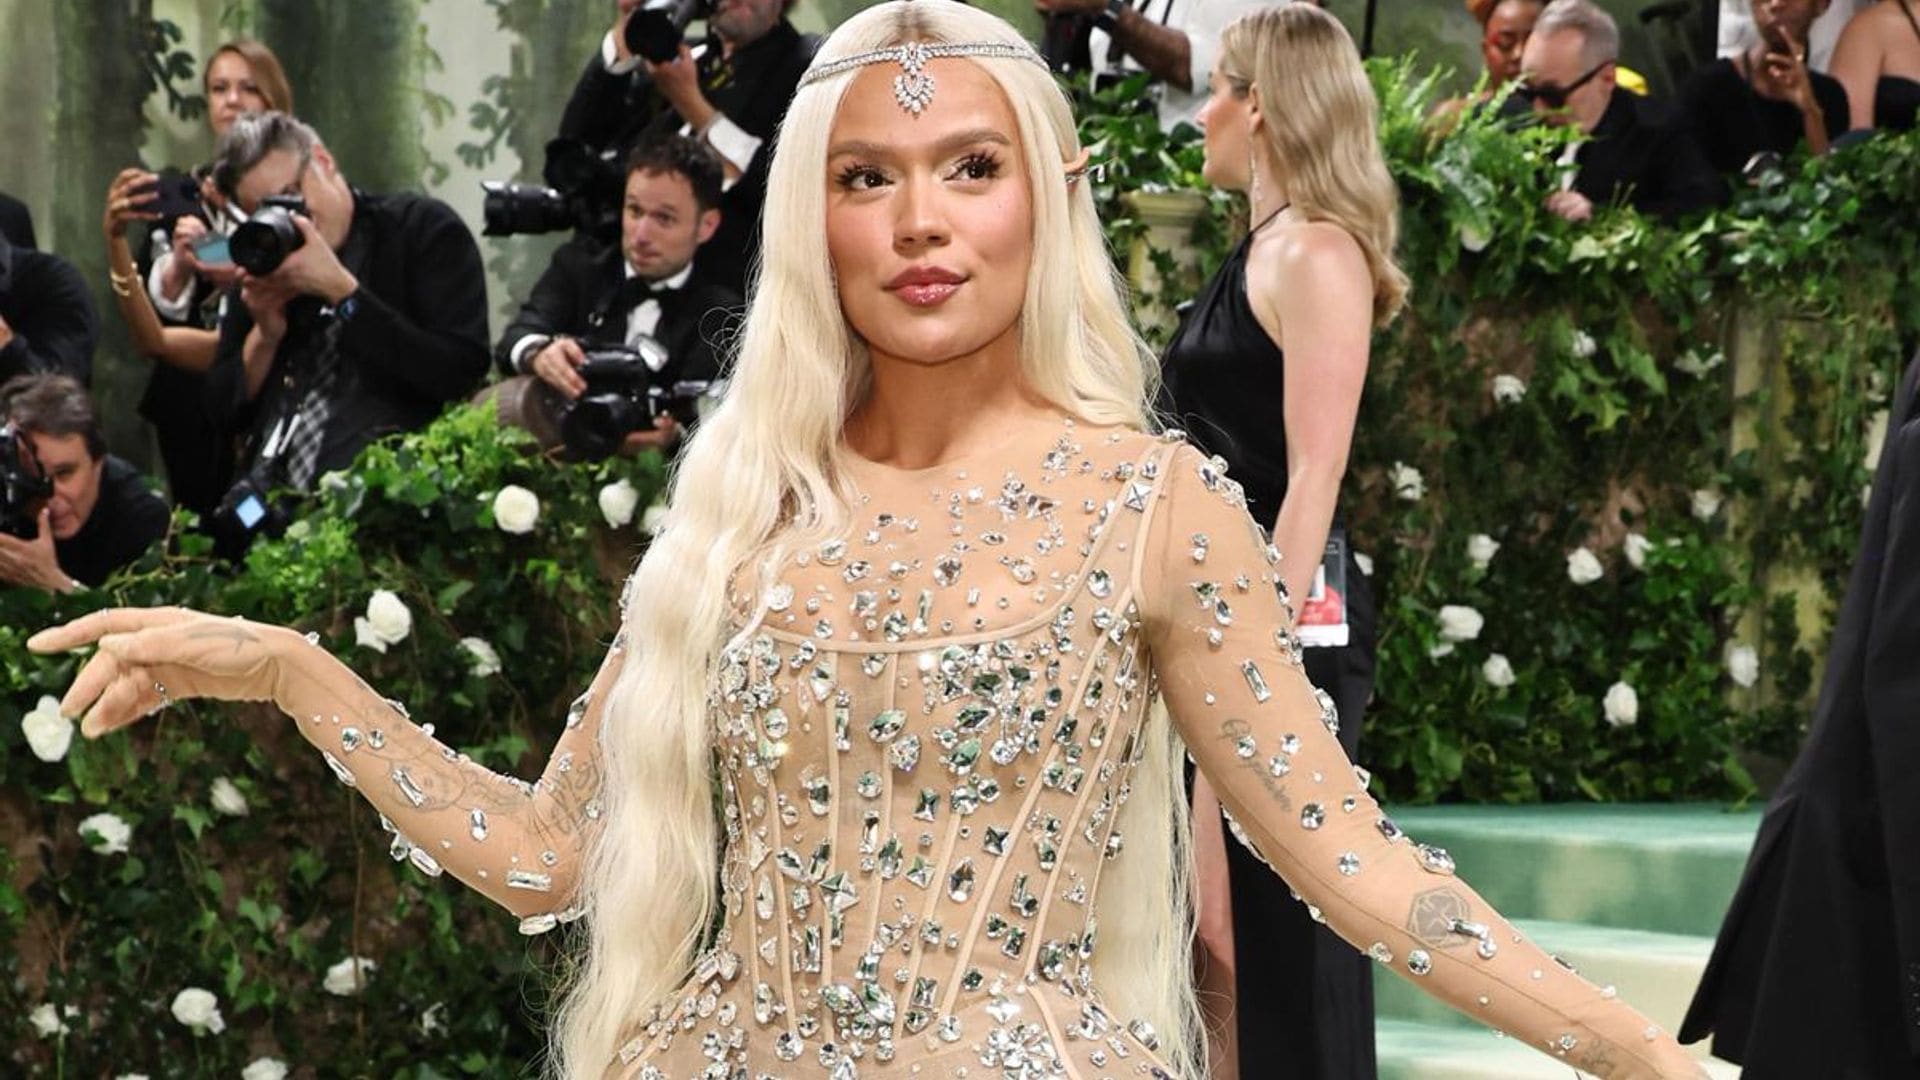 Karol G makes her Met Gala debut with an ethereal look and blonde hair